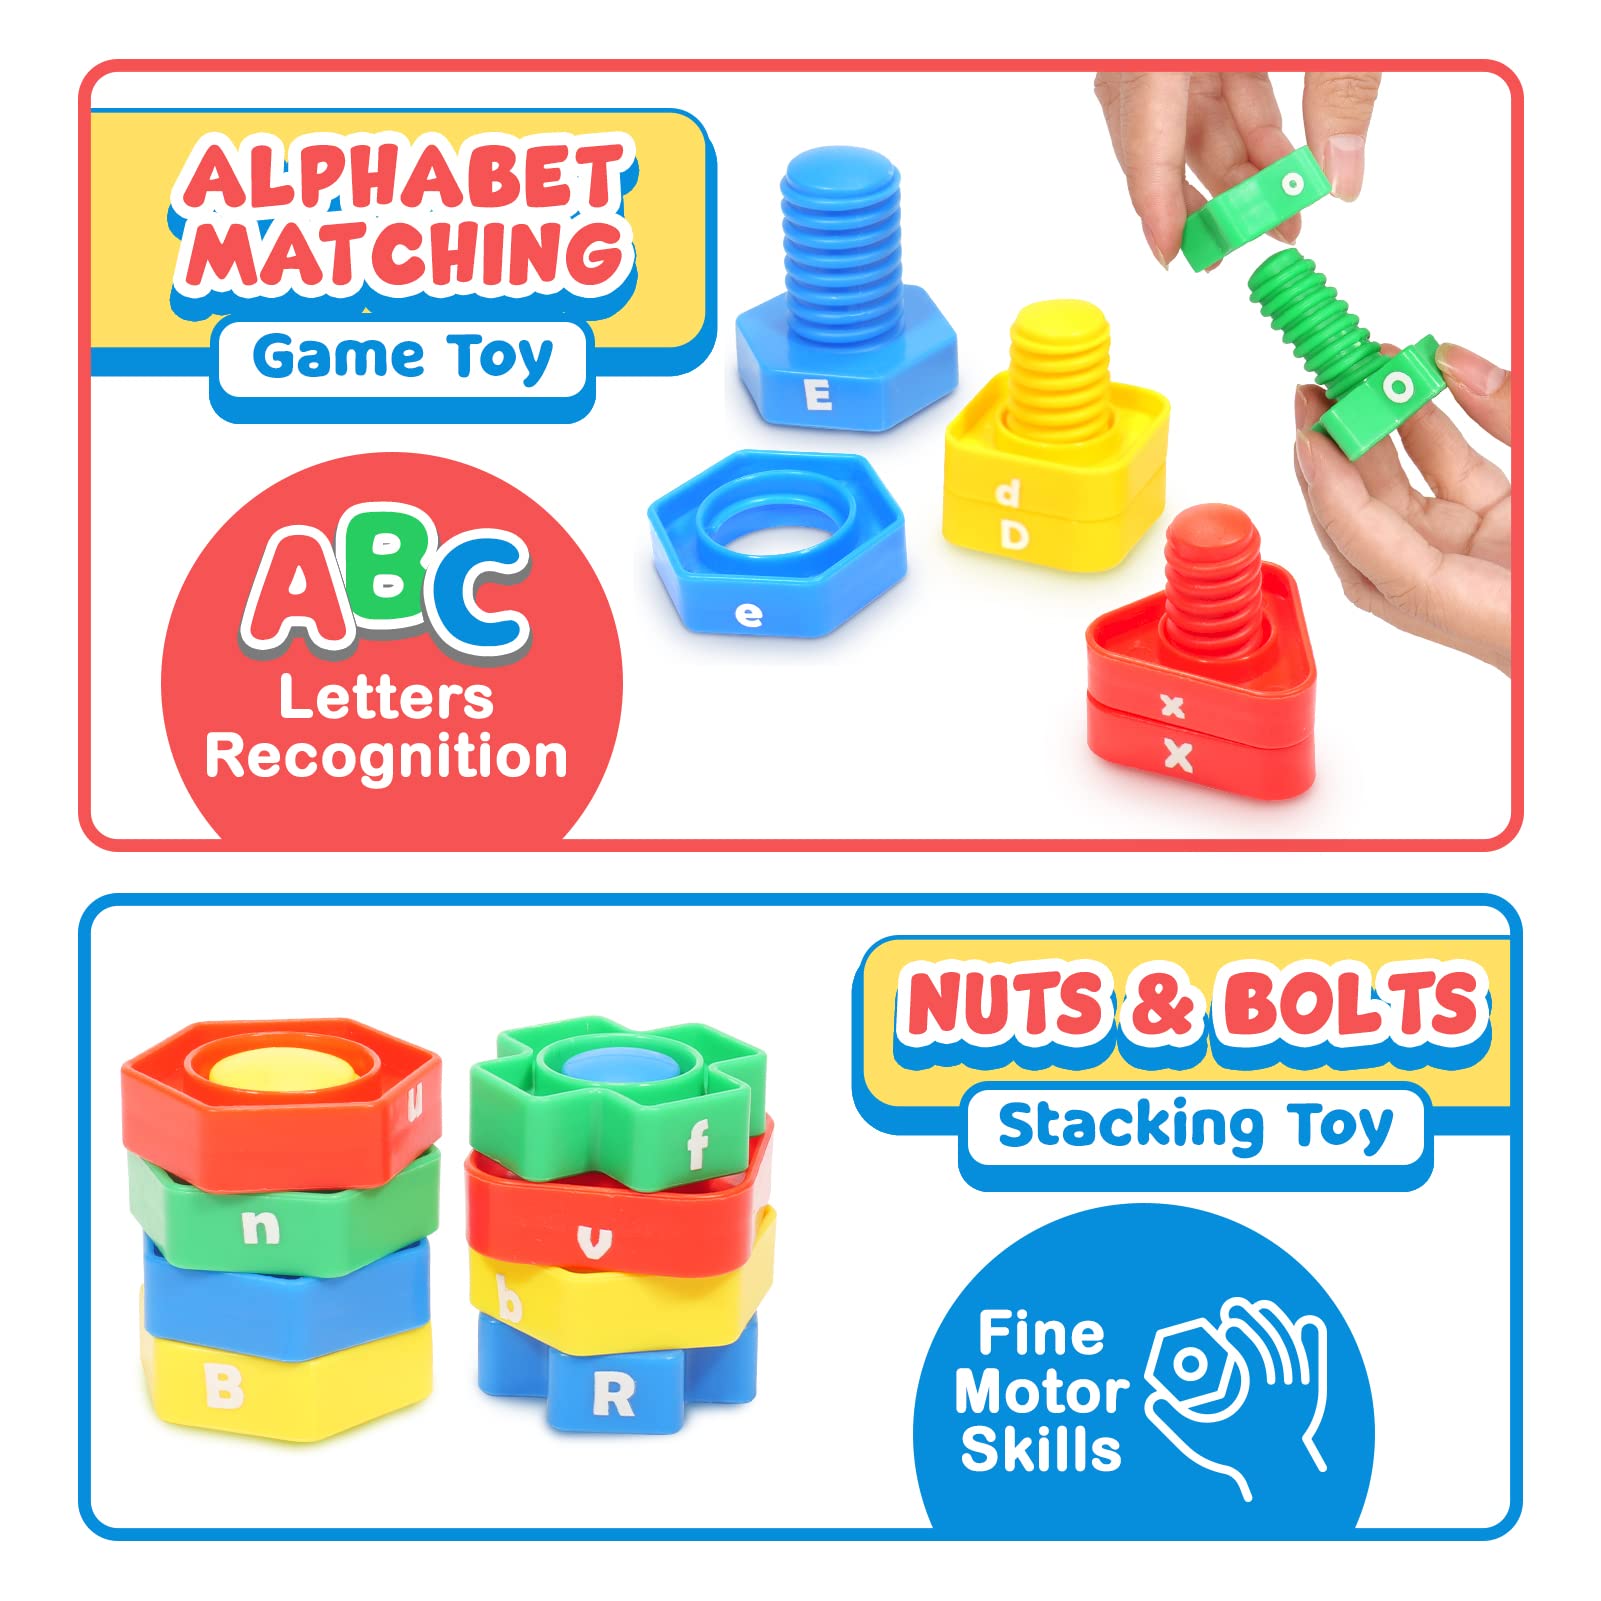 Letters Learning Matching Game Fine Motor Skills Toy for Toddlers, 26 Alphabet Learning Toys, 52 Pcs Nuts and Bolts Stacking Toys, ABC Letters Preschool Educational Montessori Toys for Kids